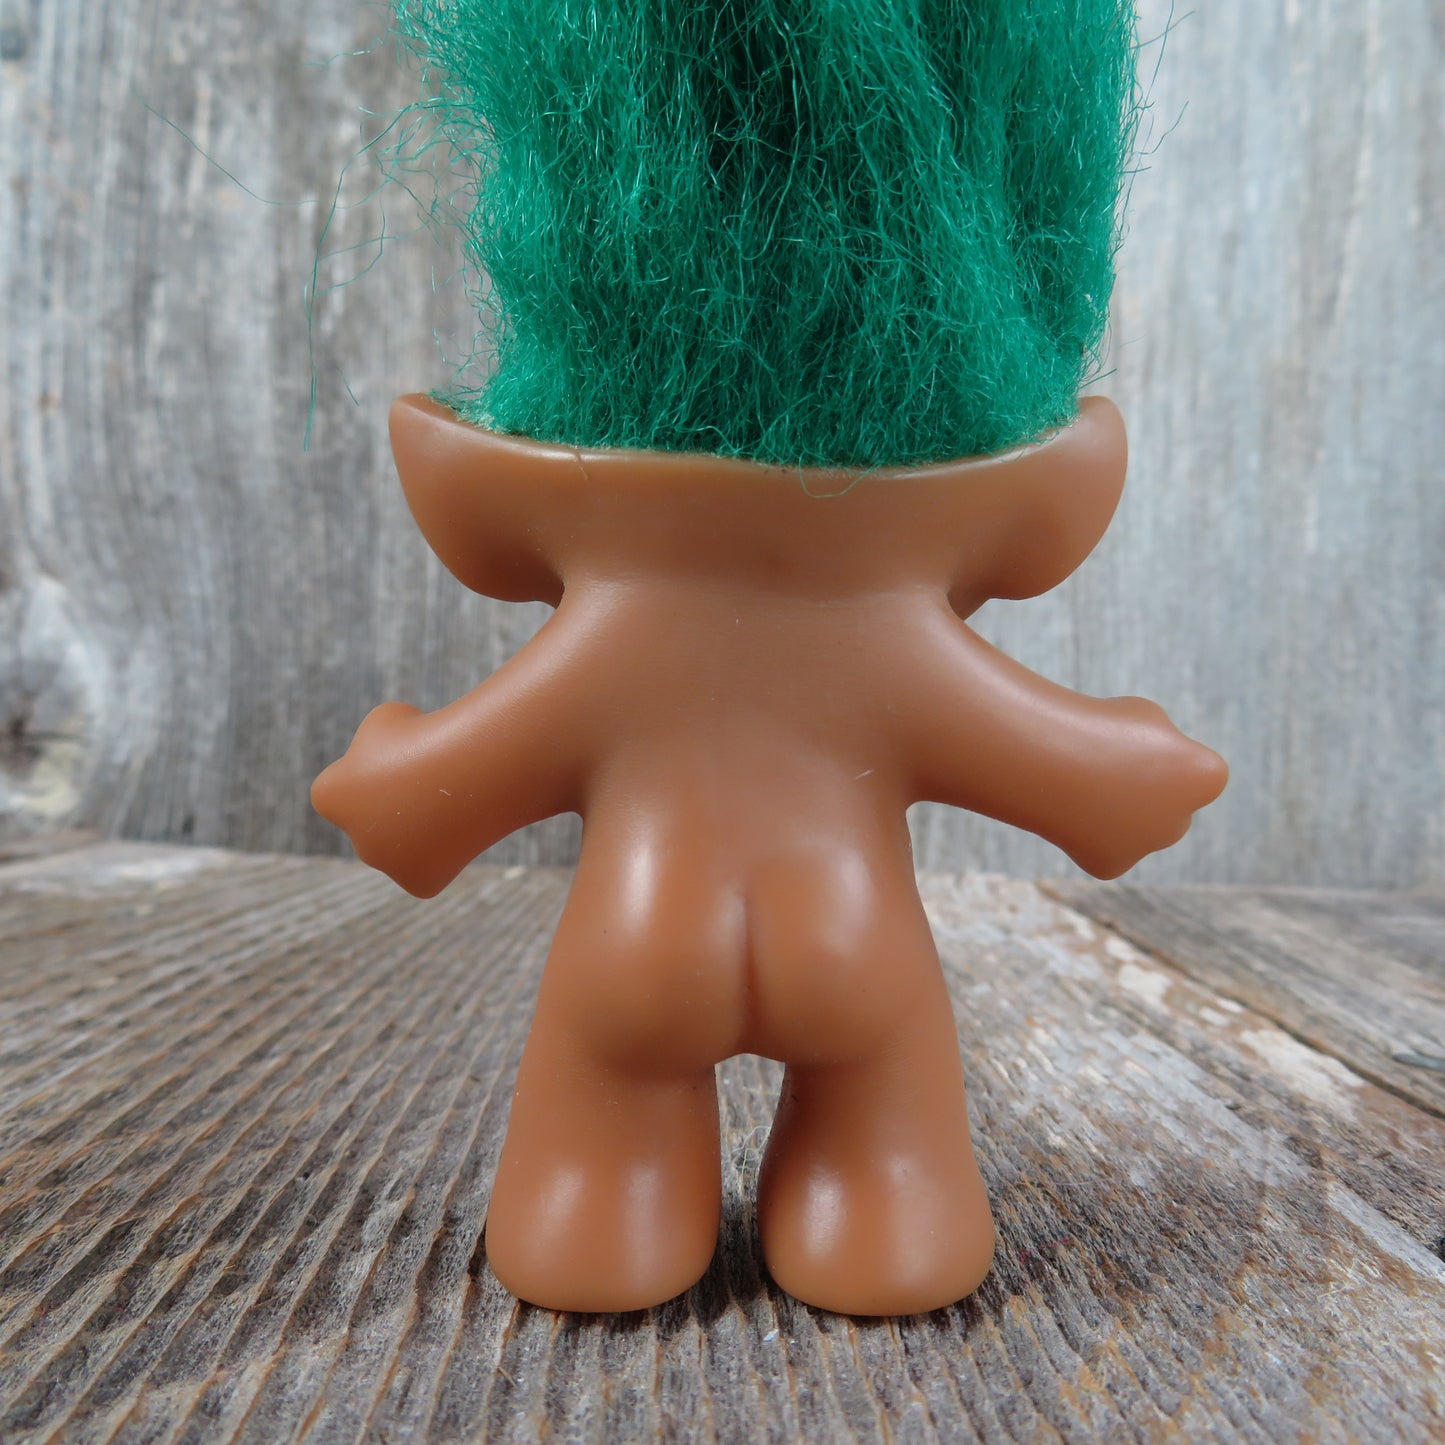 Vintage Troll Doll Orange Eyes and Star Belly Button Teal Green Hair Ace Novelty - At Grandma's Table